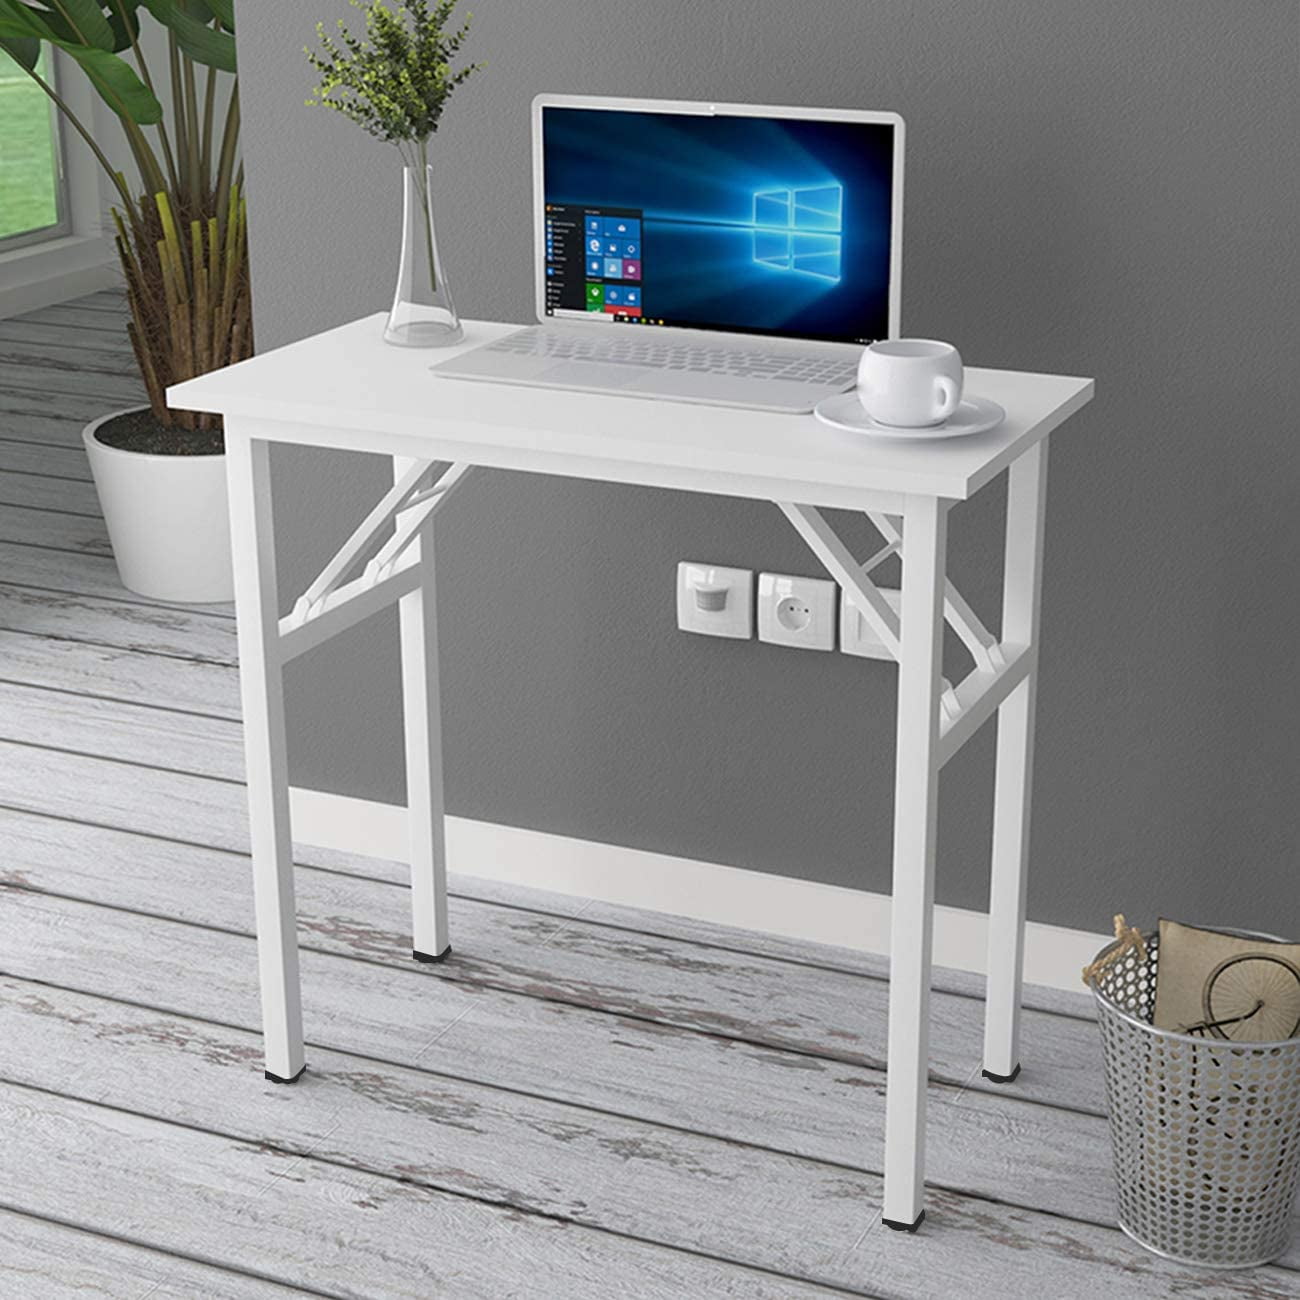 SOFSYS Modern Folding Computer Writing Desk for Small Space, Gaming, and Home Office Organization, Foldable Industrial Metal